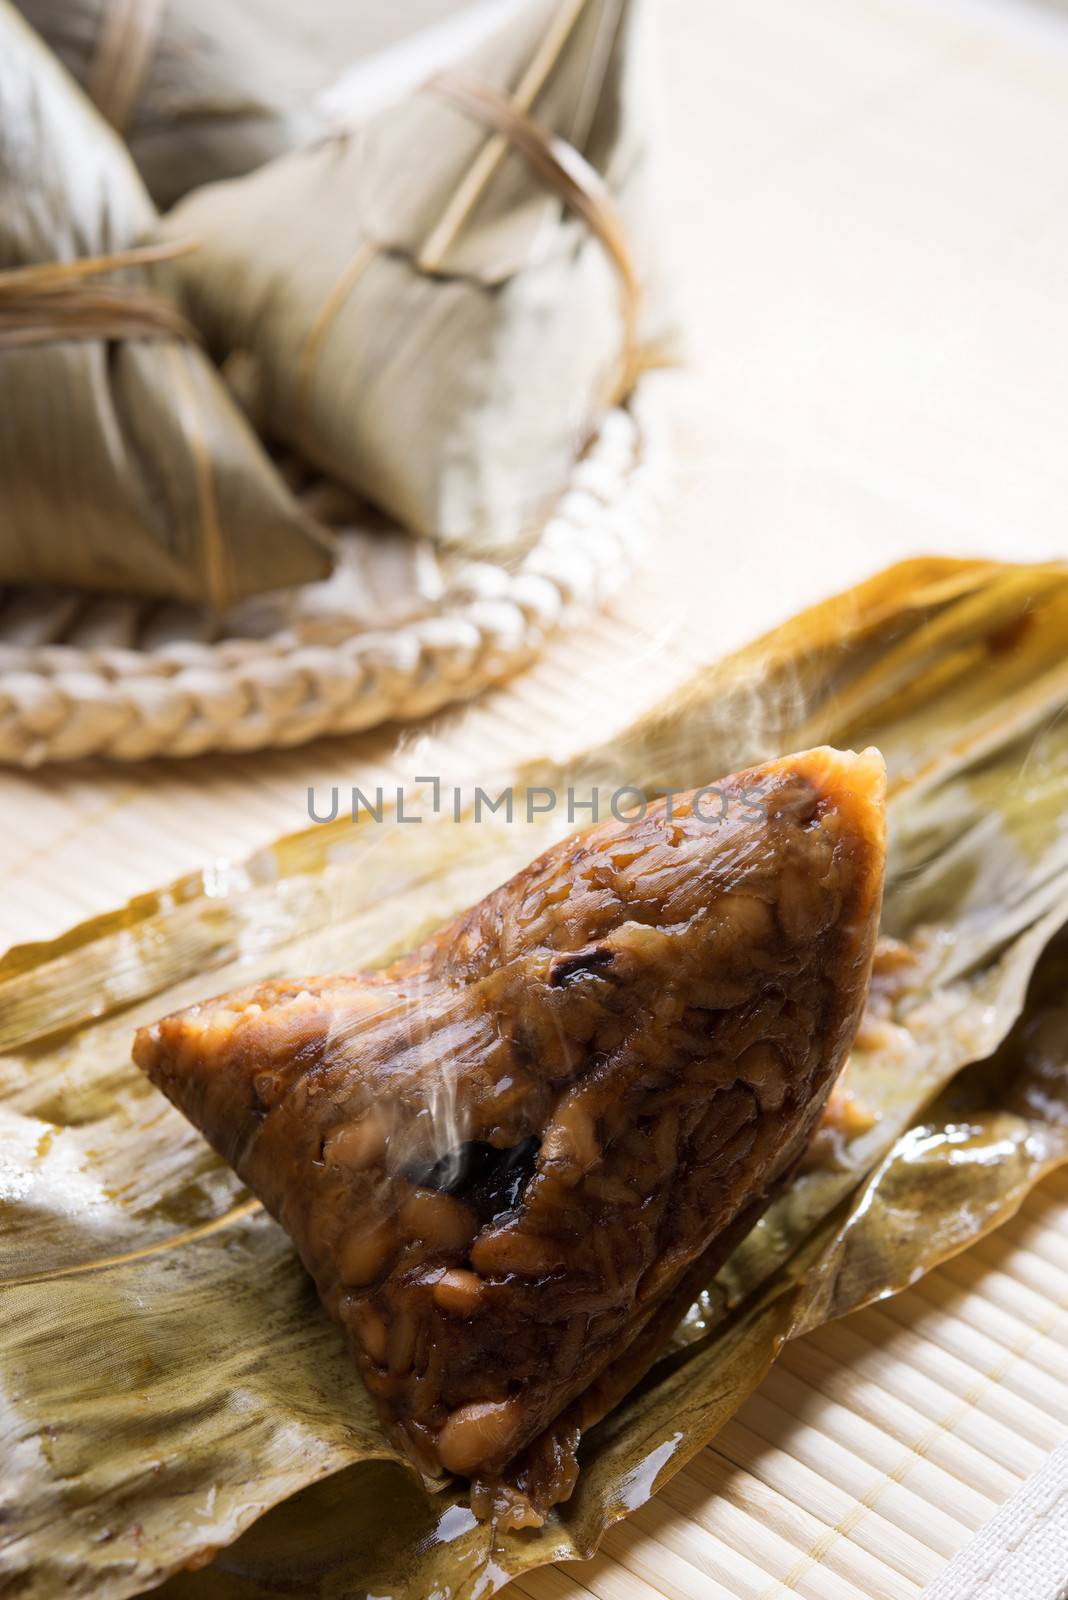 Hot steamed rice dumpling or zongzi. Traditional steamed sticky  glutinous rice dumplings. Chinese food dim sum. Asian cuisine.